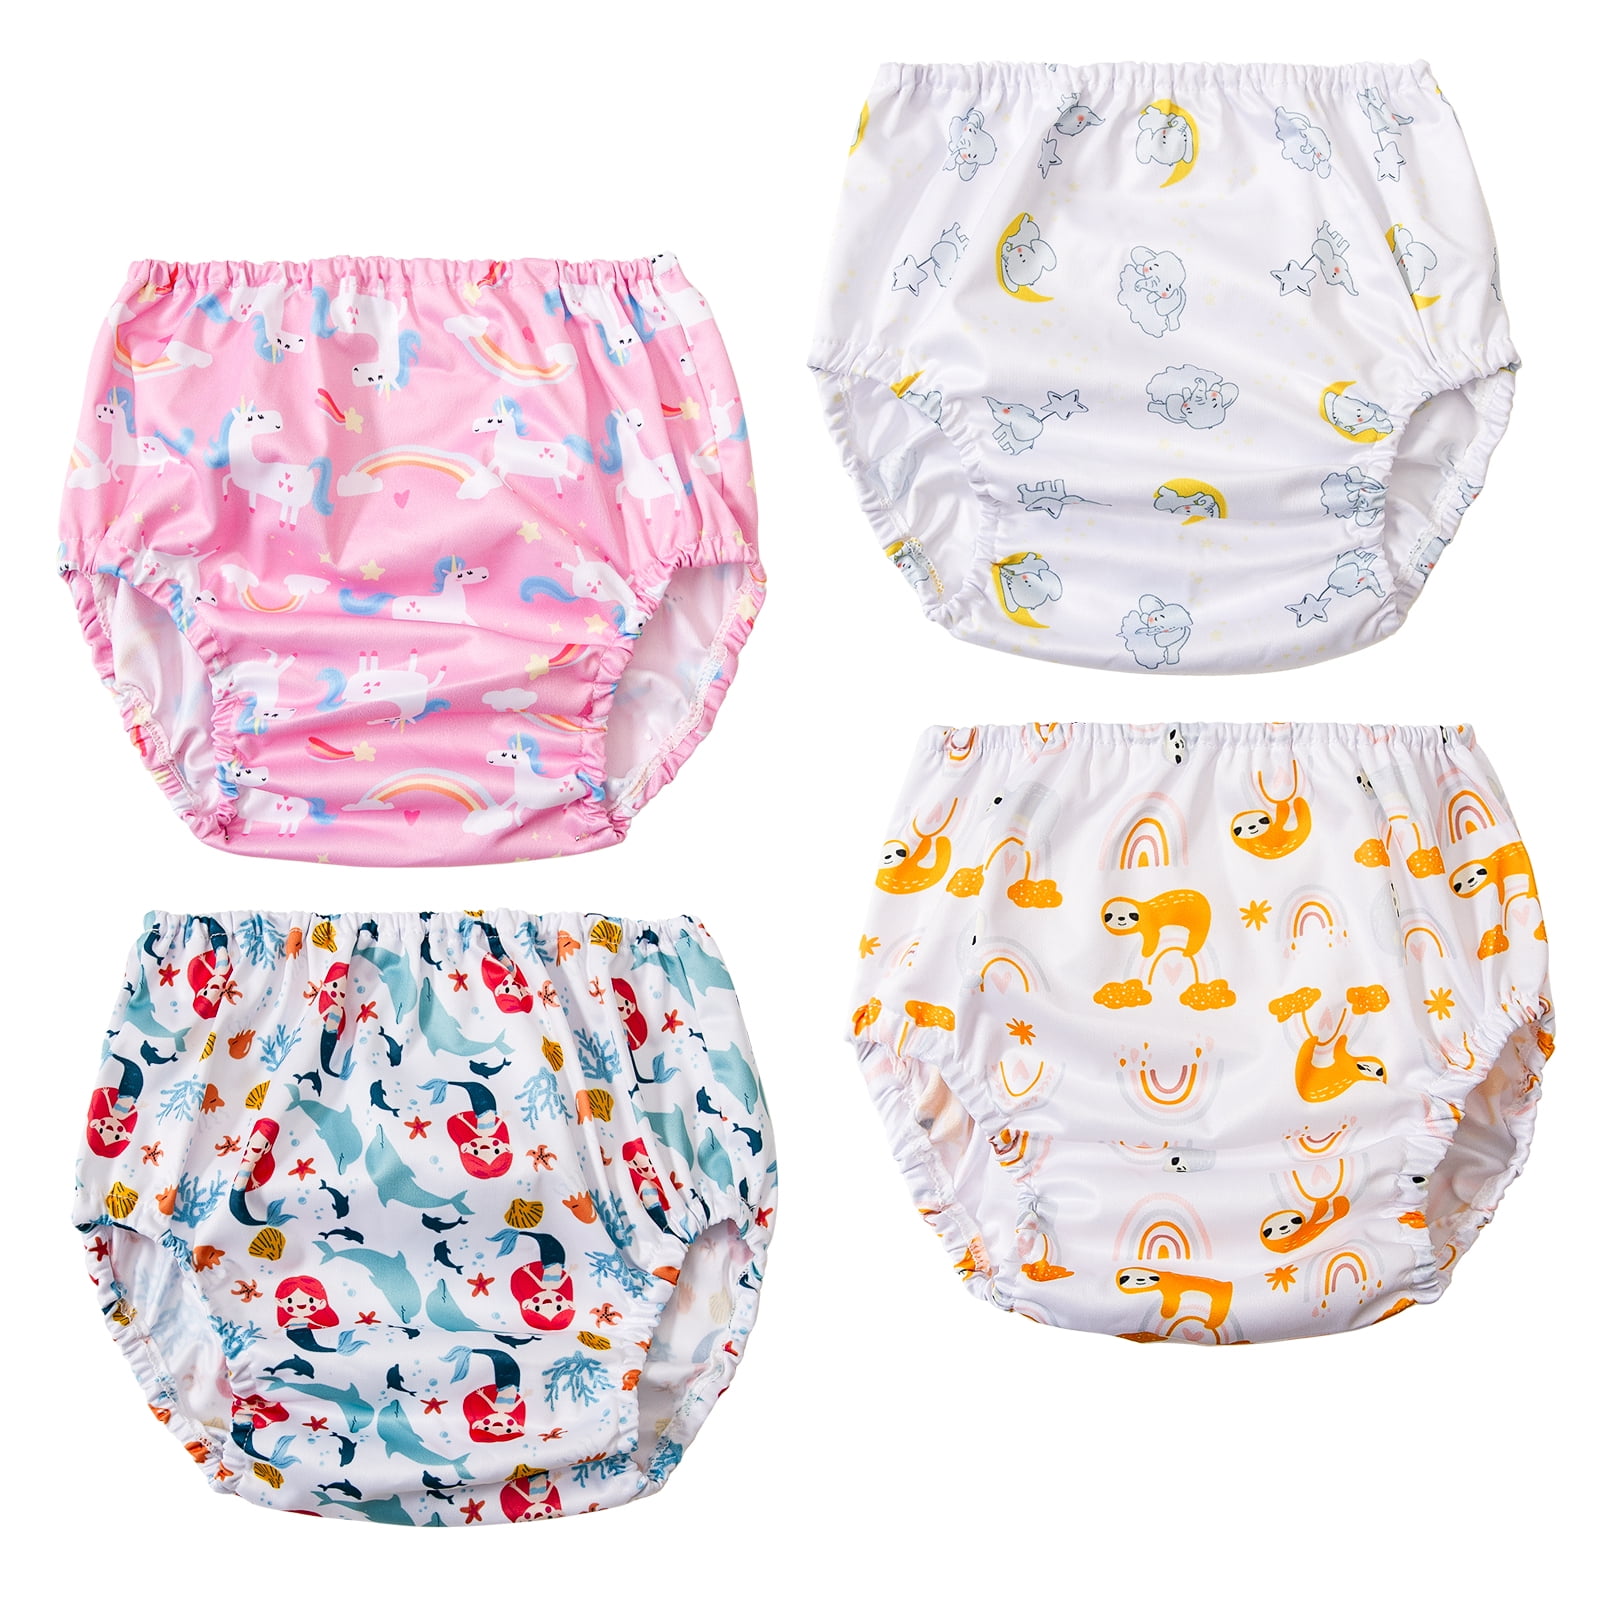 Reusable Rubber Pants for Toddlers Diaper Cover for Swimming Cute Plastic  Diaper Covers Toddler Plastic Pants Rubber Pants for Babies 4 Packs Girls 3T